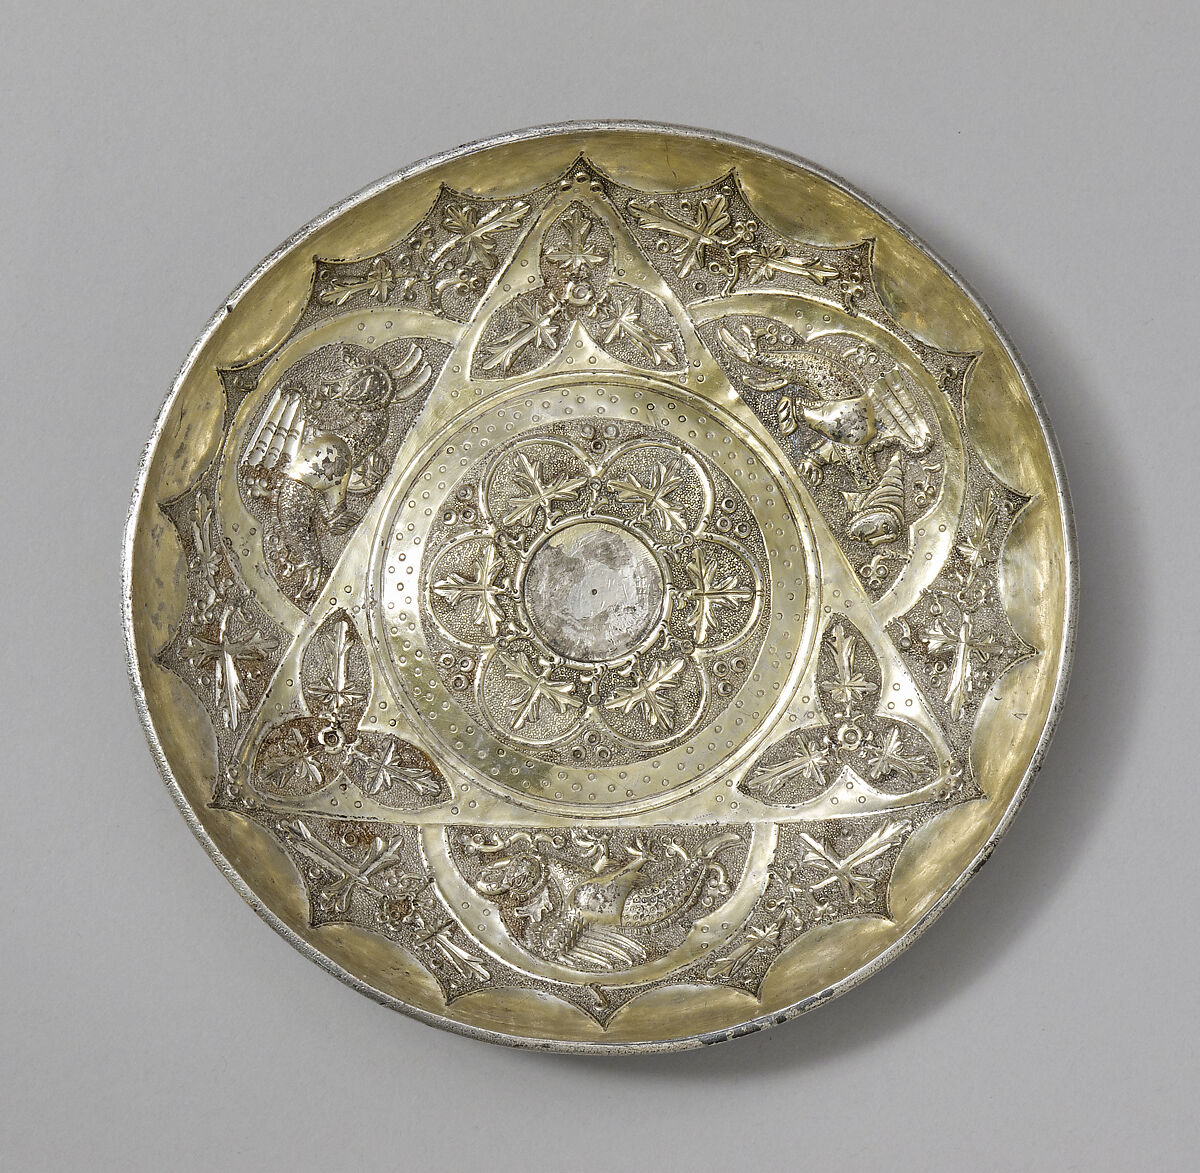 Drinking Bowl (Hanap), Silver, and gilded silver, Eastern European or Bosnian or Serbian (?) 